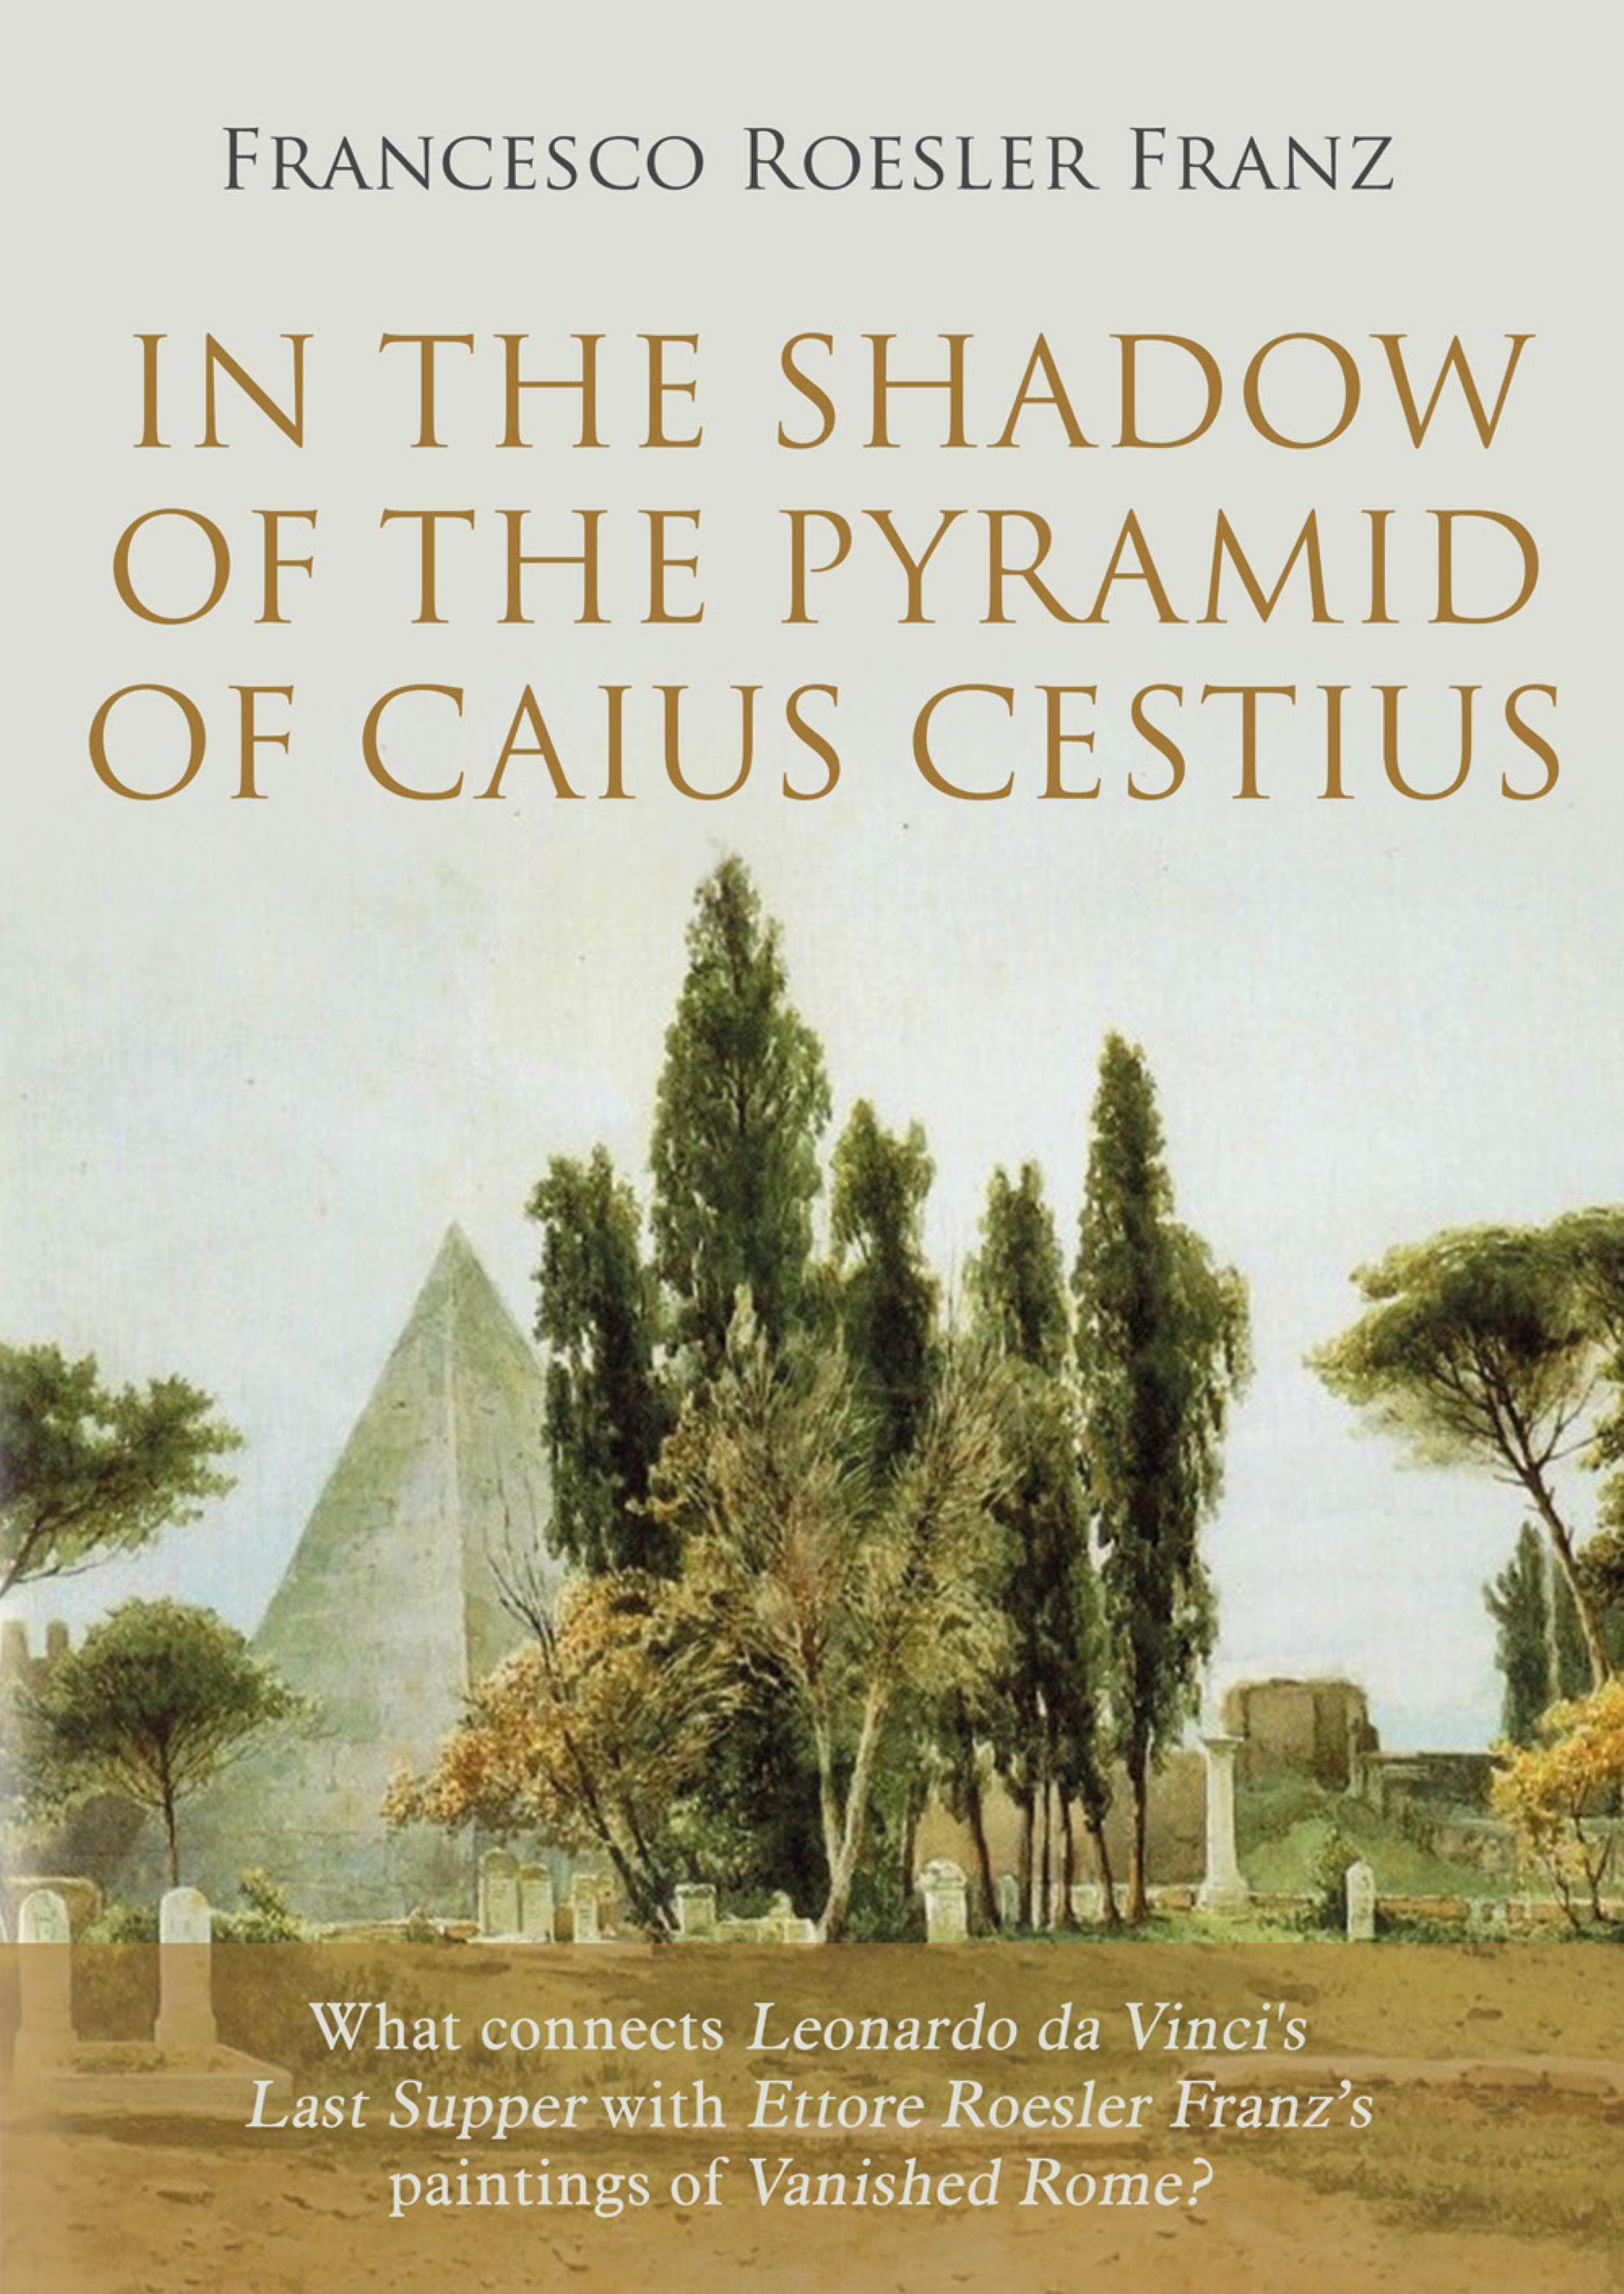 In the shadow of the Pyramid of Caius Cestius